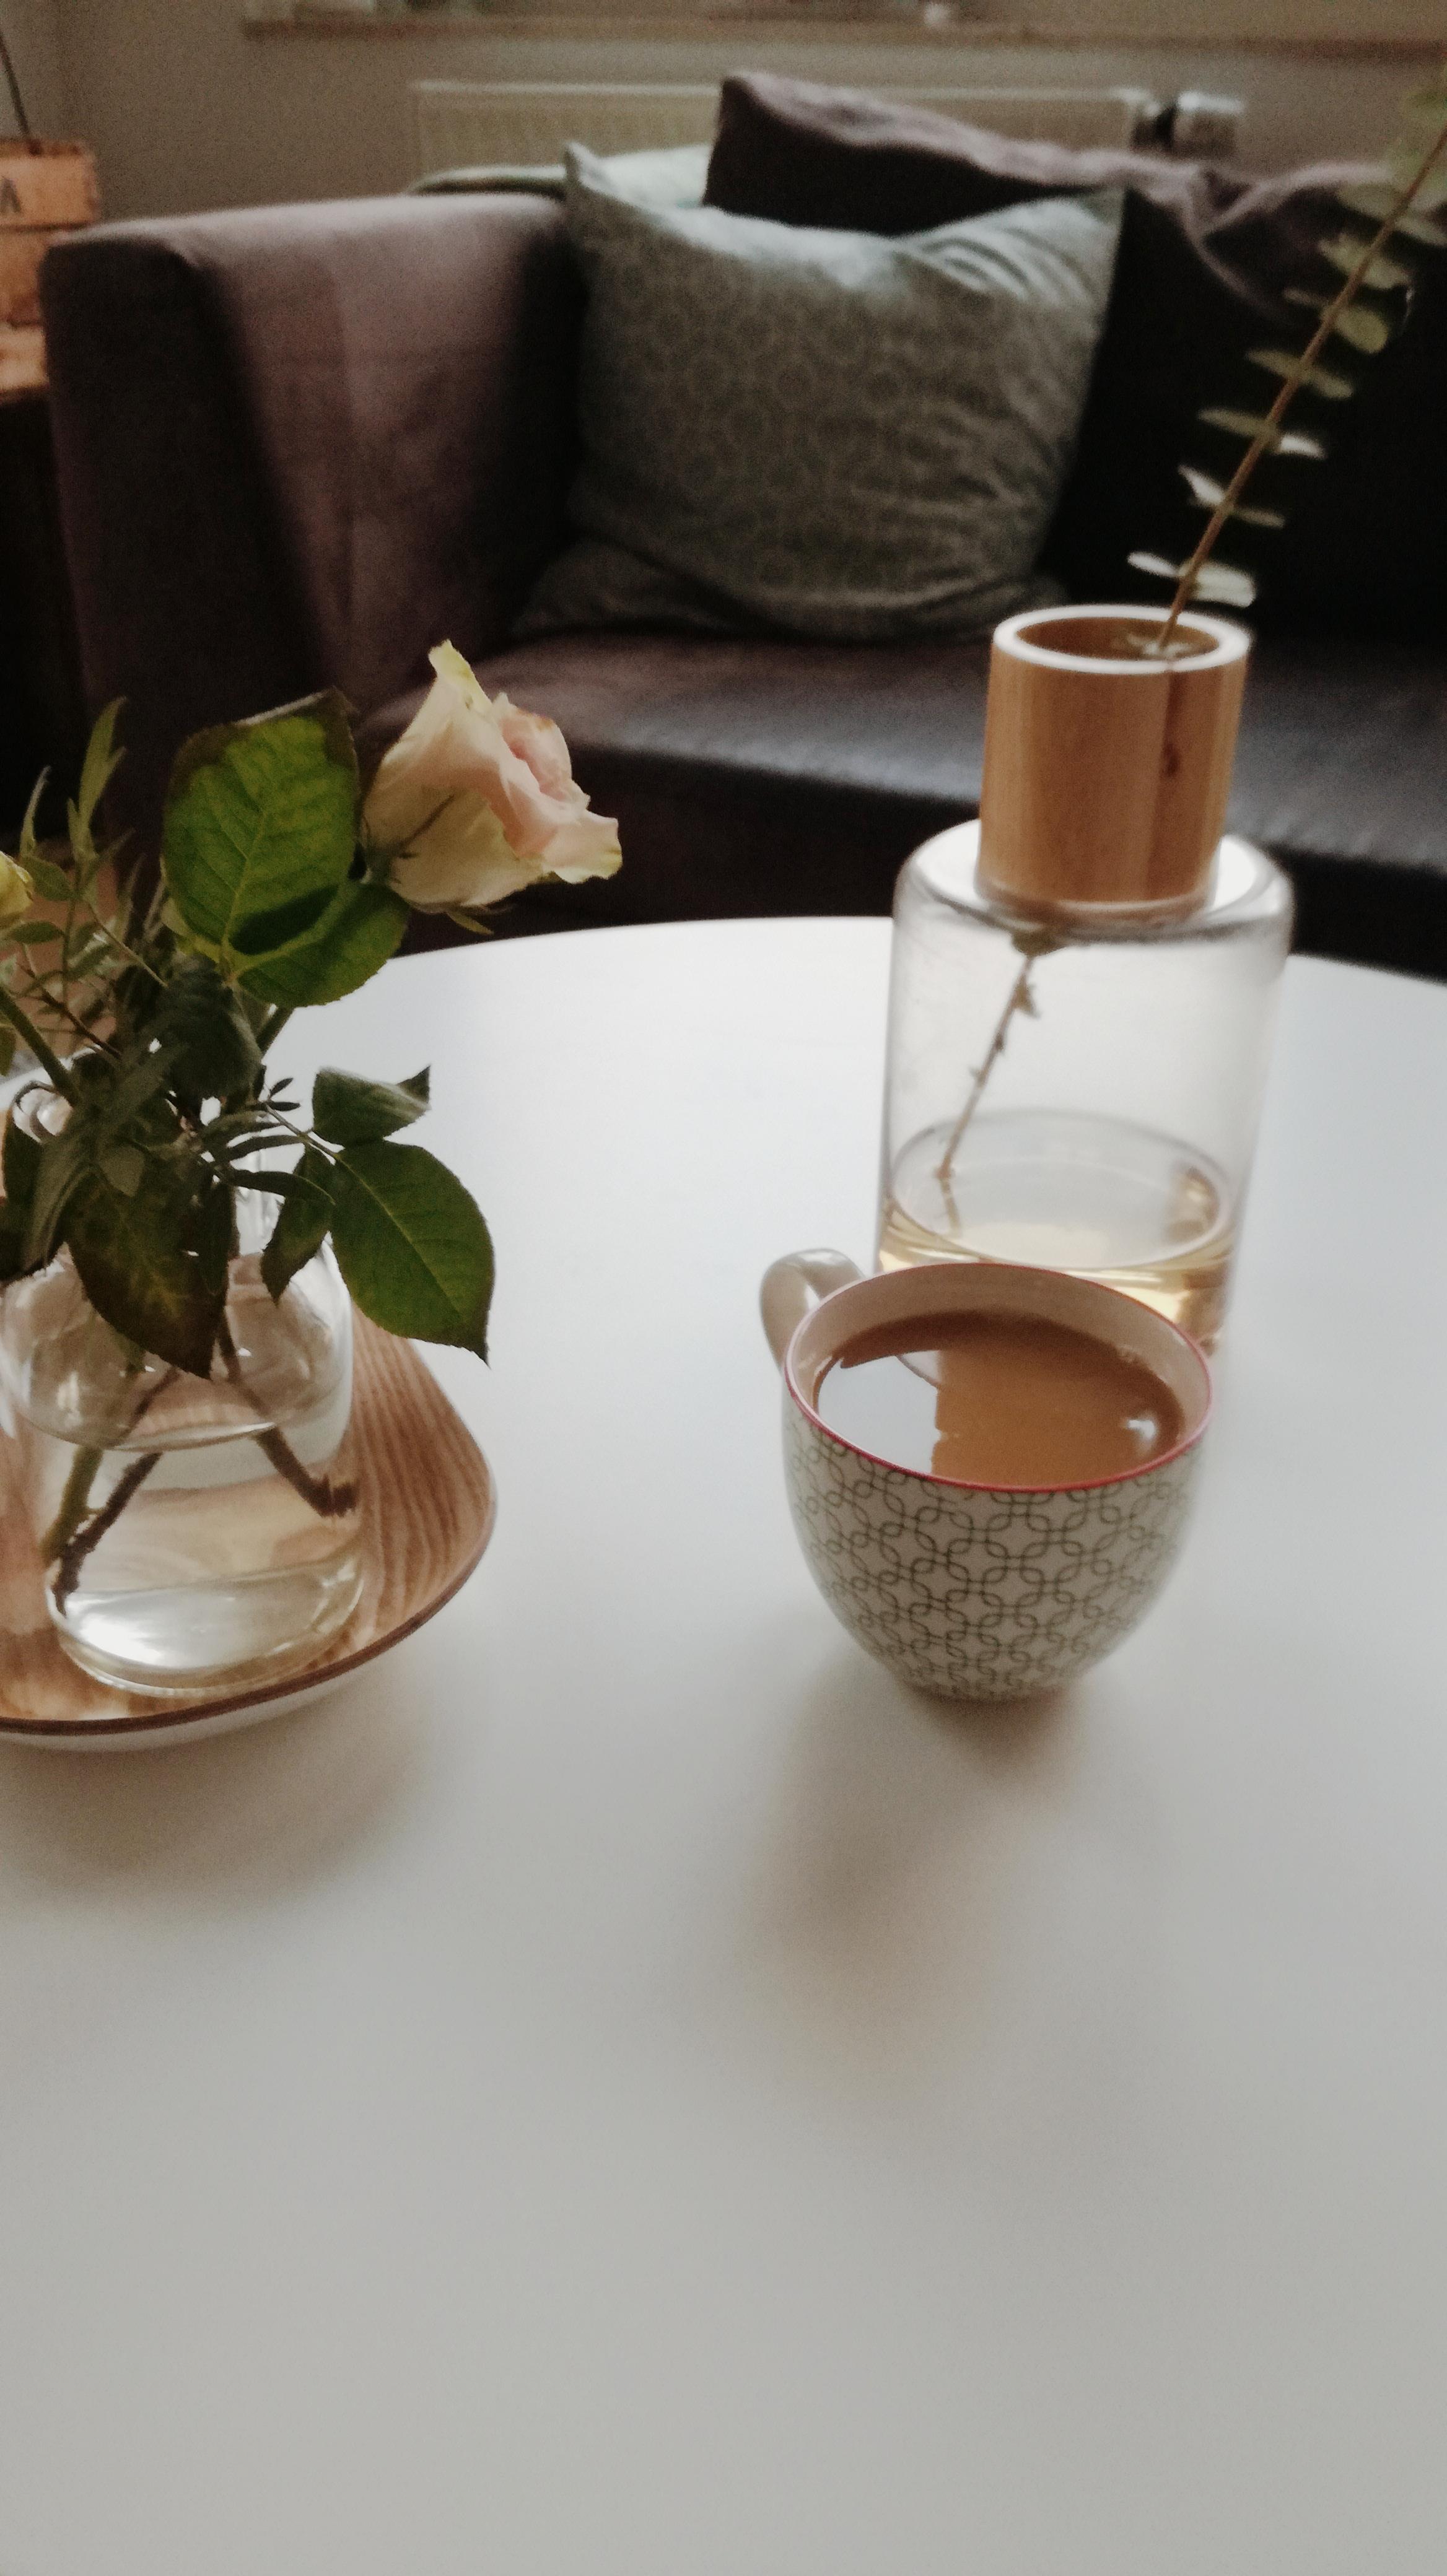 slow living × welcome today #coffeelover #skandi #hygge #cozyhome #flowers